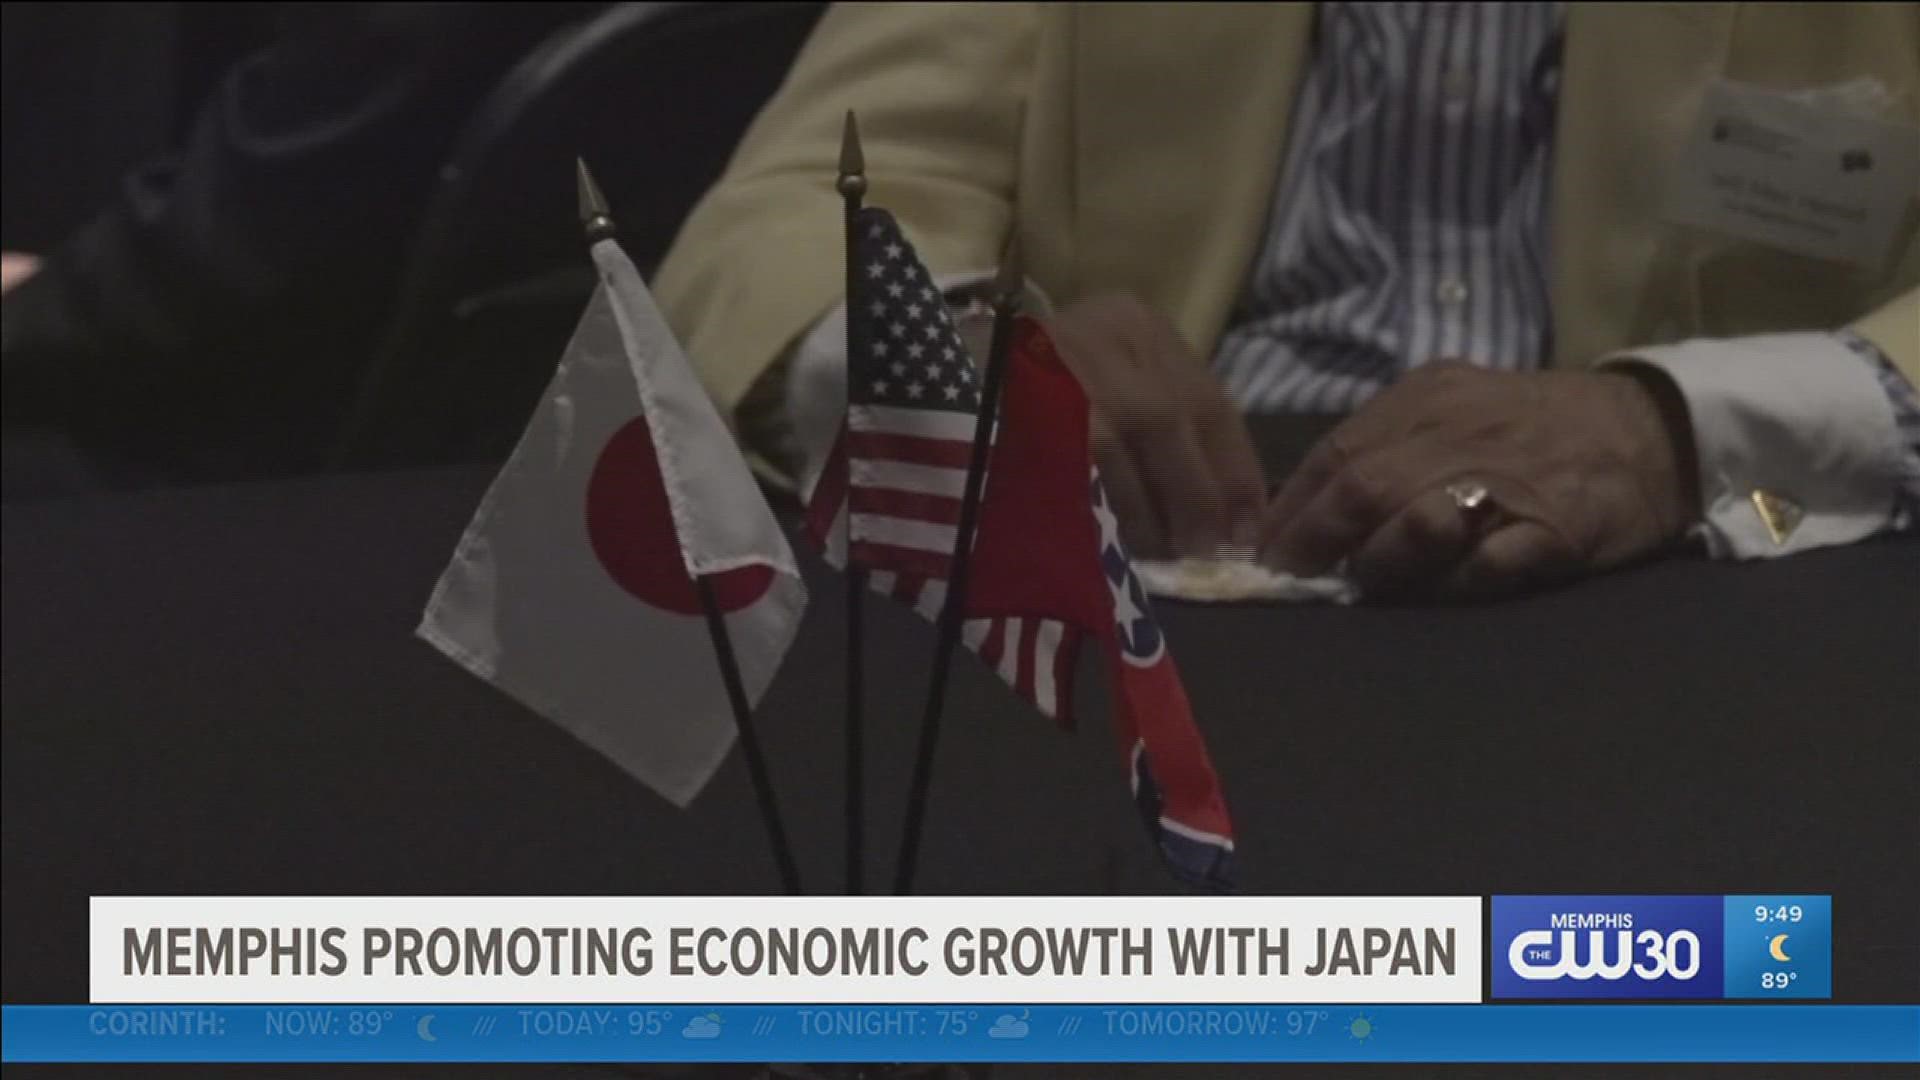 Memphis Mayor Jim Strickland said over 5,000 Shelby County residents are employed by Japanese companies and he hopes to see that number grow.